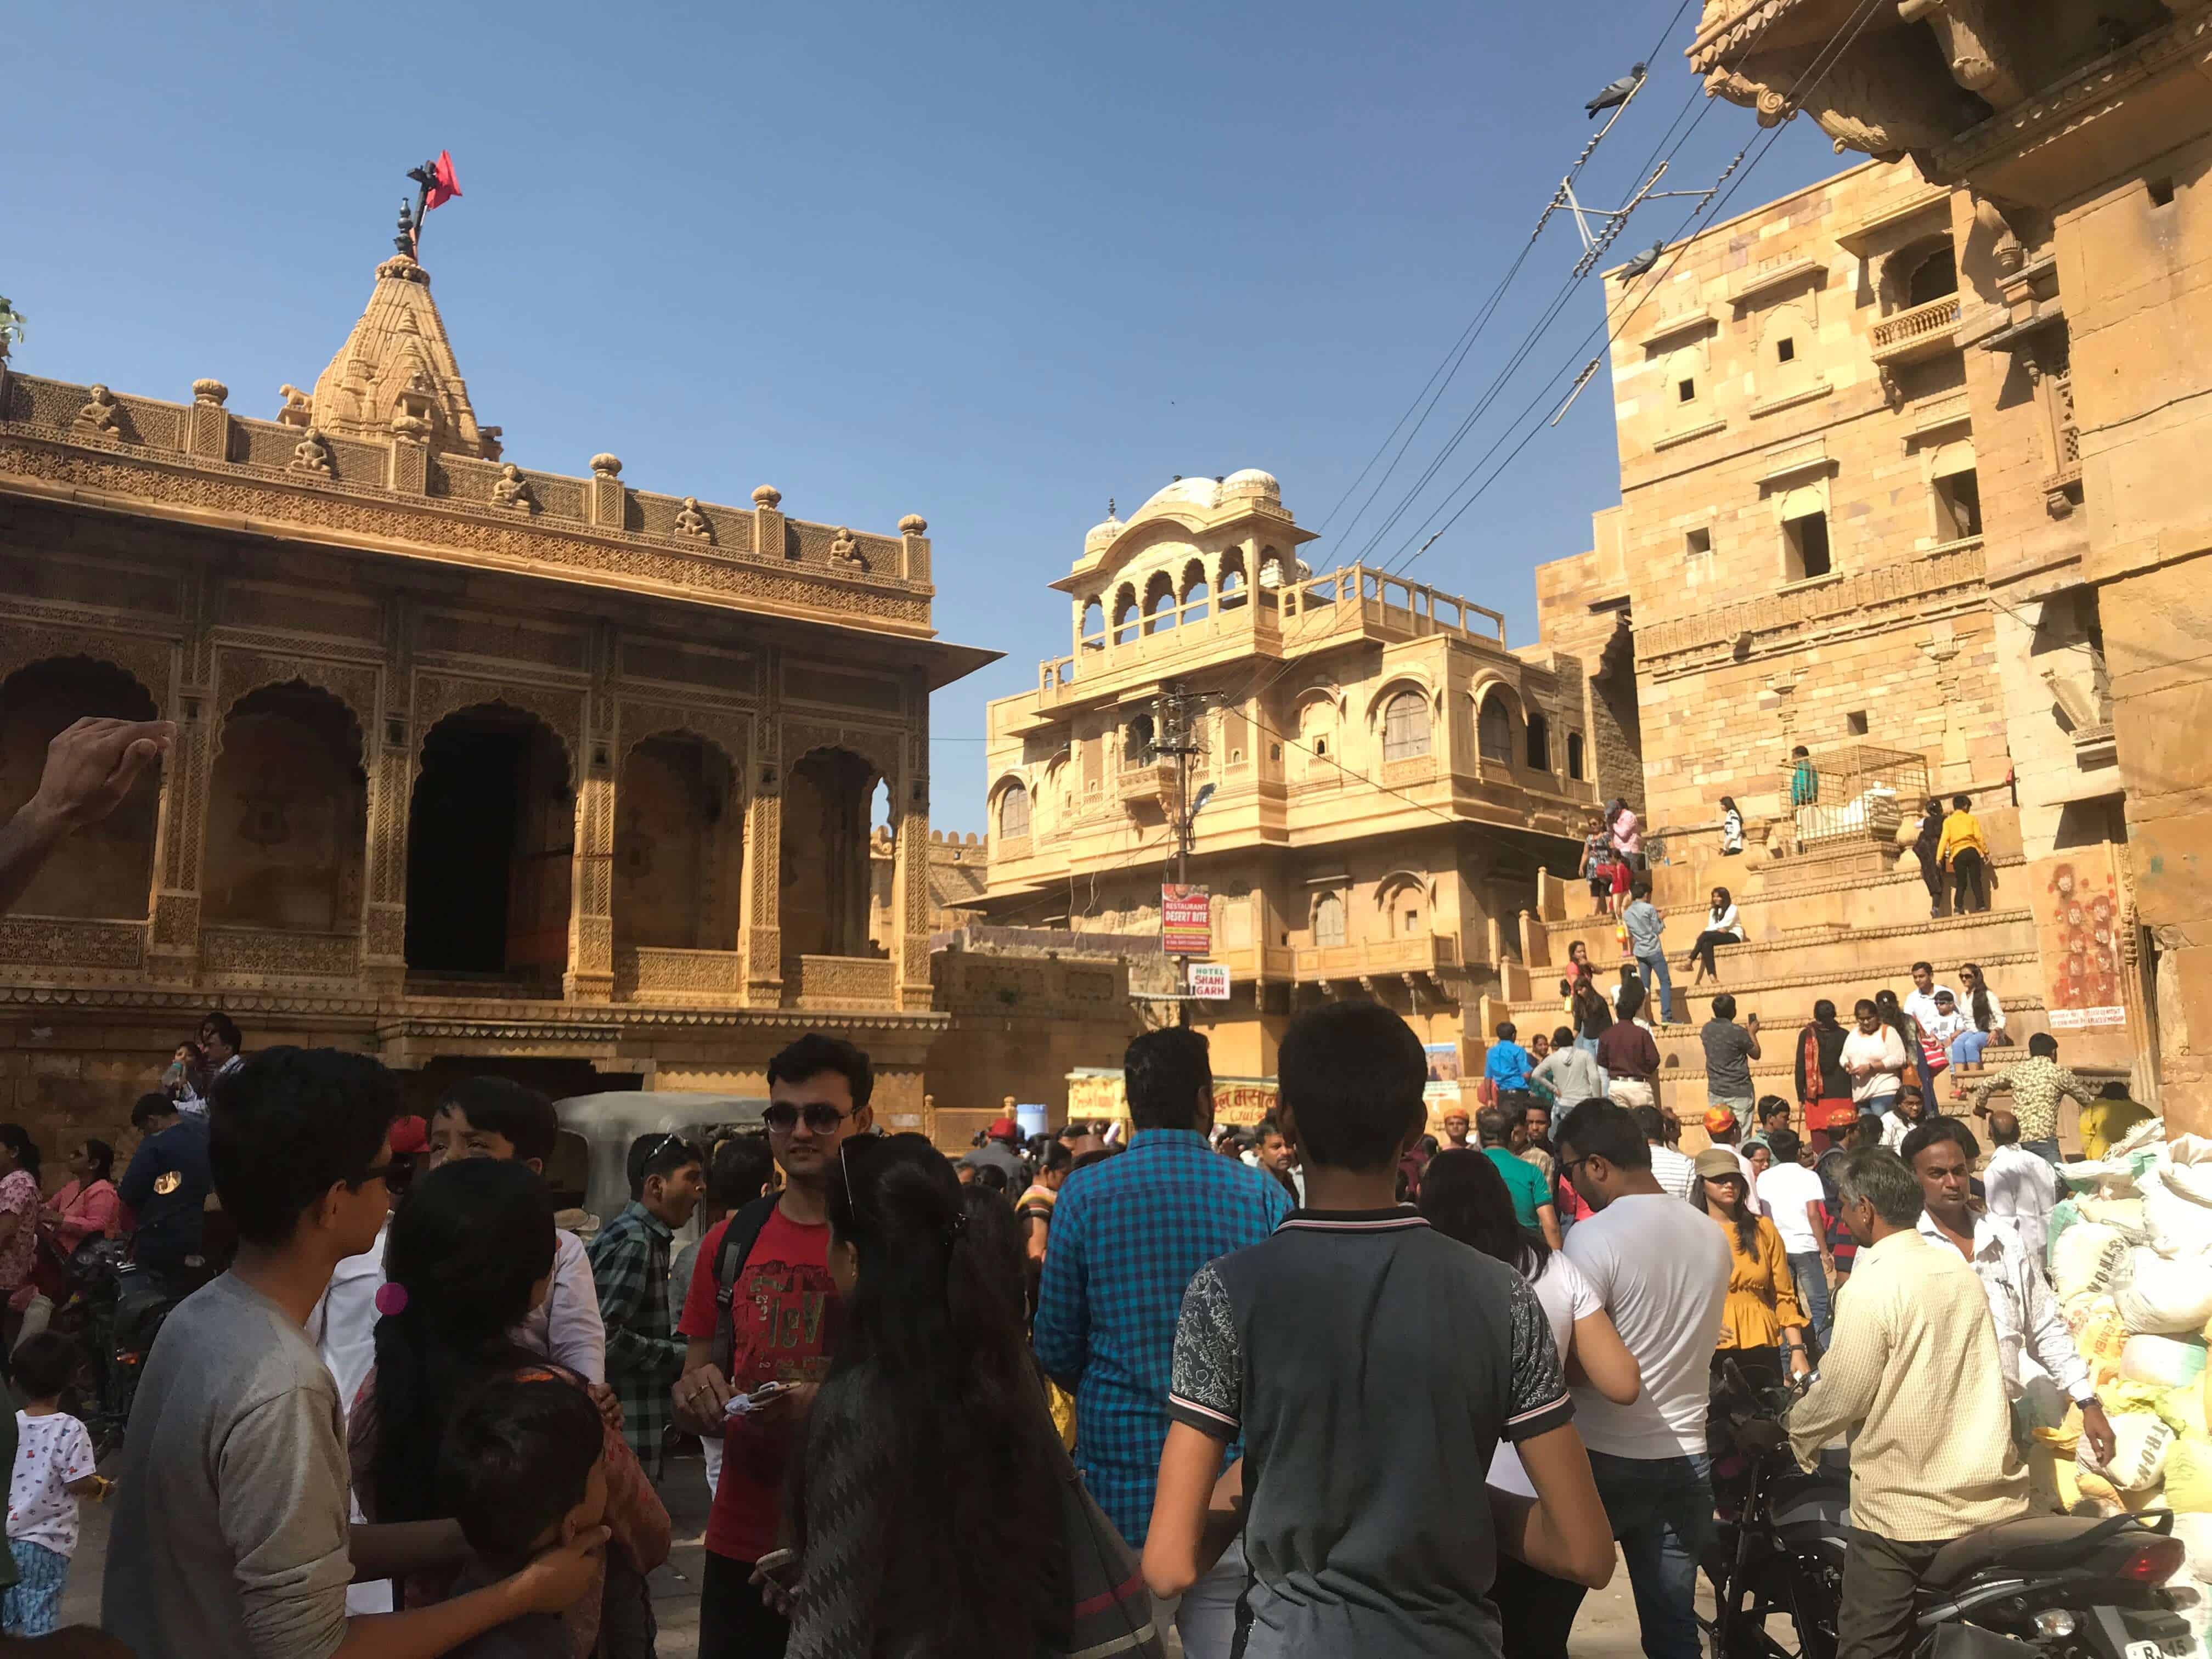 Visiting Jaisalmar fort during the 5th day of Diwali